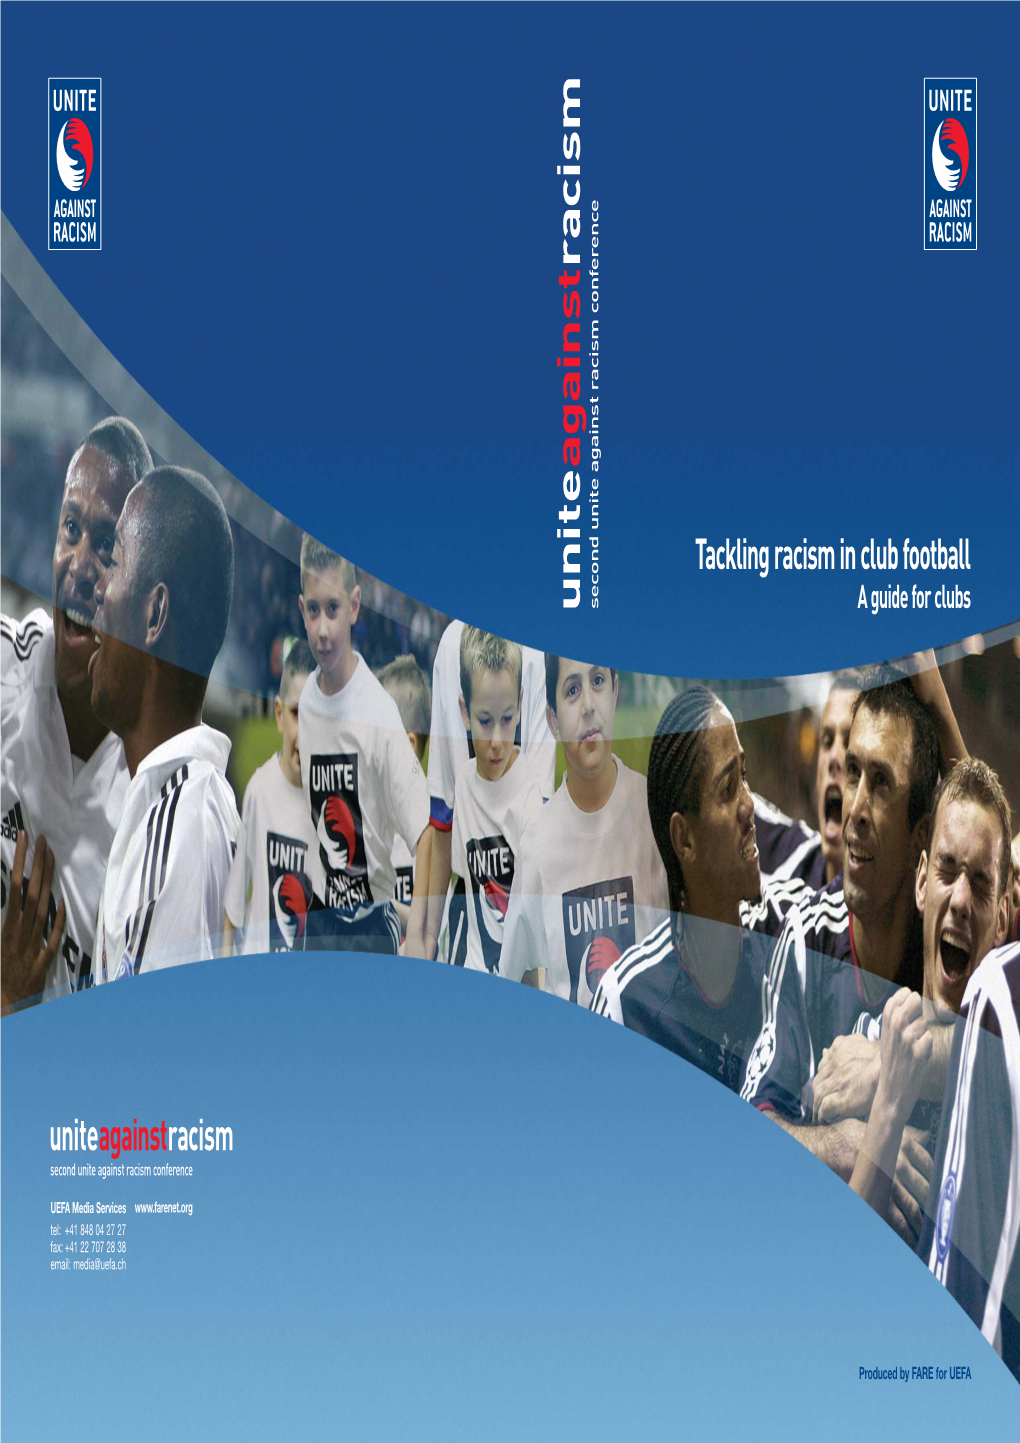 Tackling Racism in Club Football a Guide for Clubs Produced by FARE for UEFA UAR Tackling Racism 9.08.2006.Qxd 1/11/06 09:01 Page 3